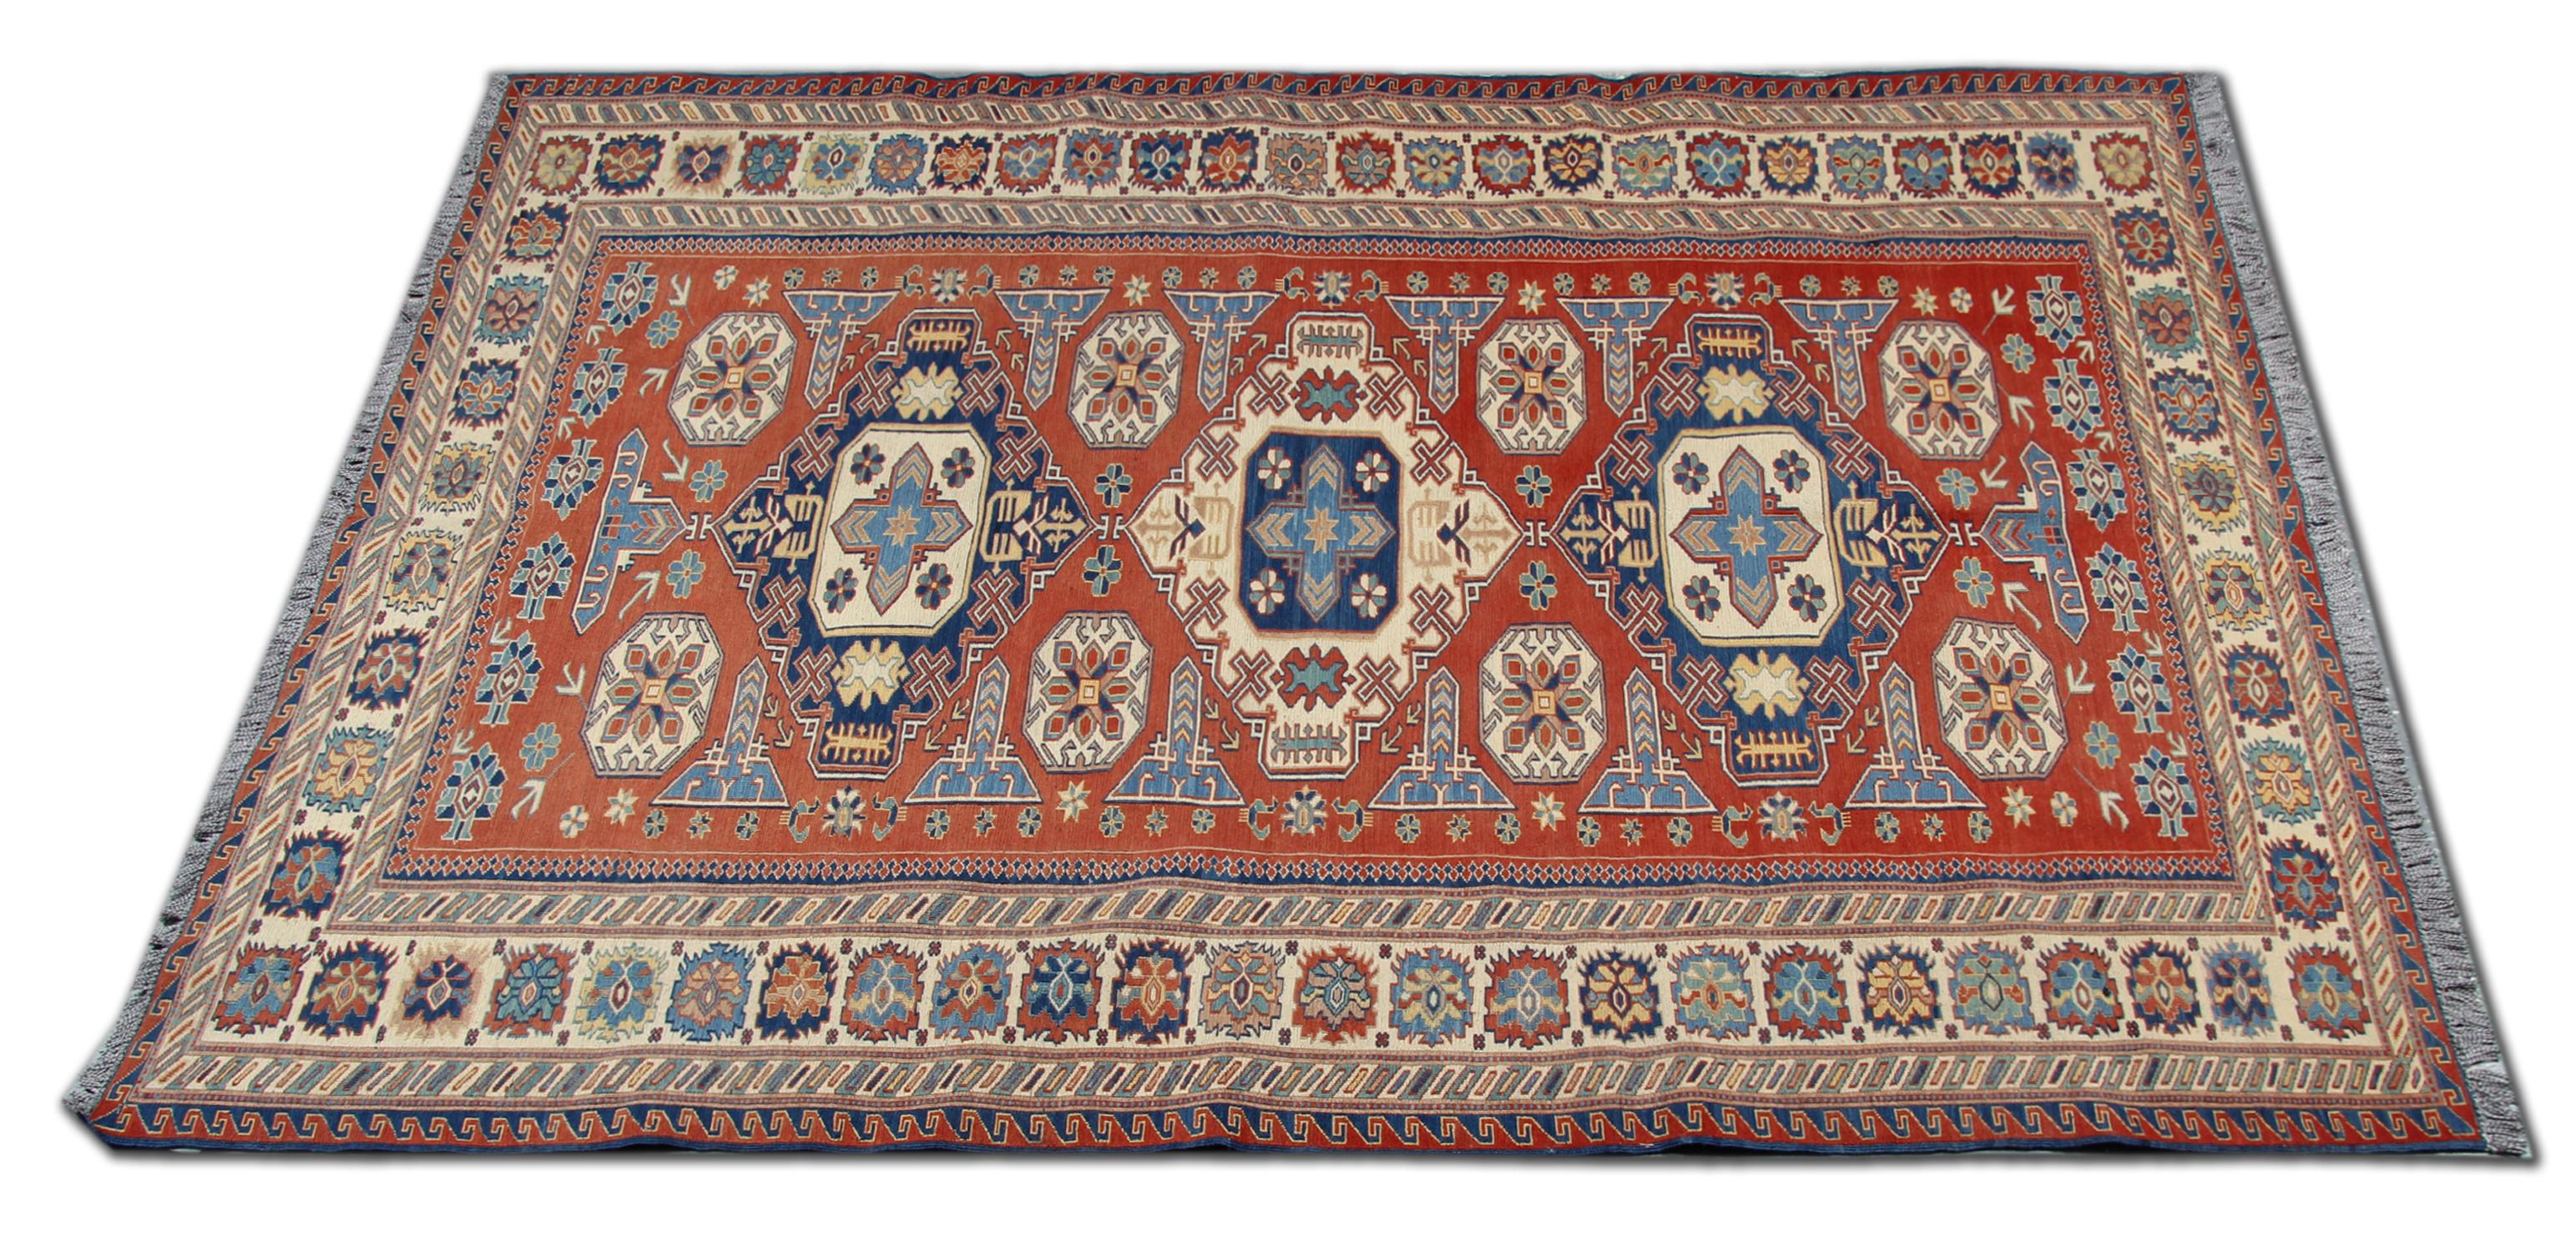 This piece was woven by hand in Afghanistan in 1950 with an elegant tribal medallion design in accents of cream and blue on a rust background. Woven with great intricacy in a symmetrical pattern, the central design is then framed by a repeat pattern